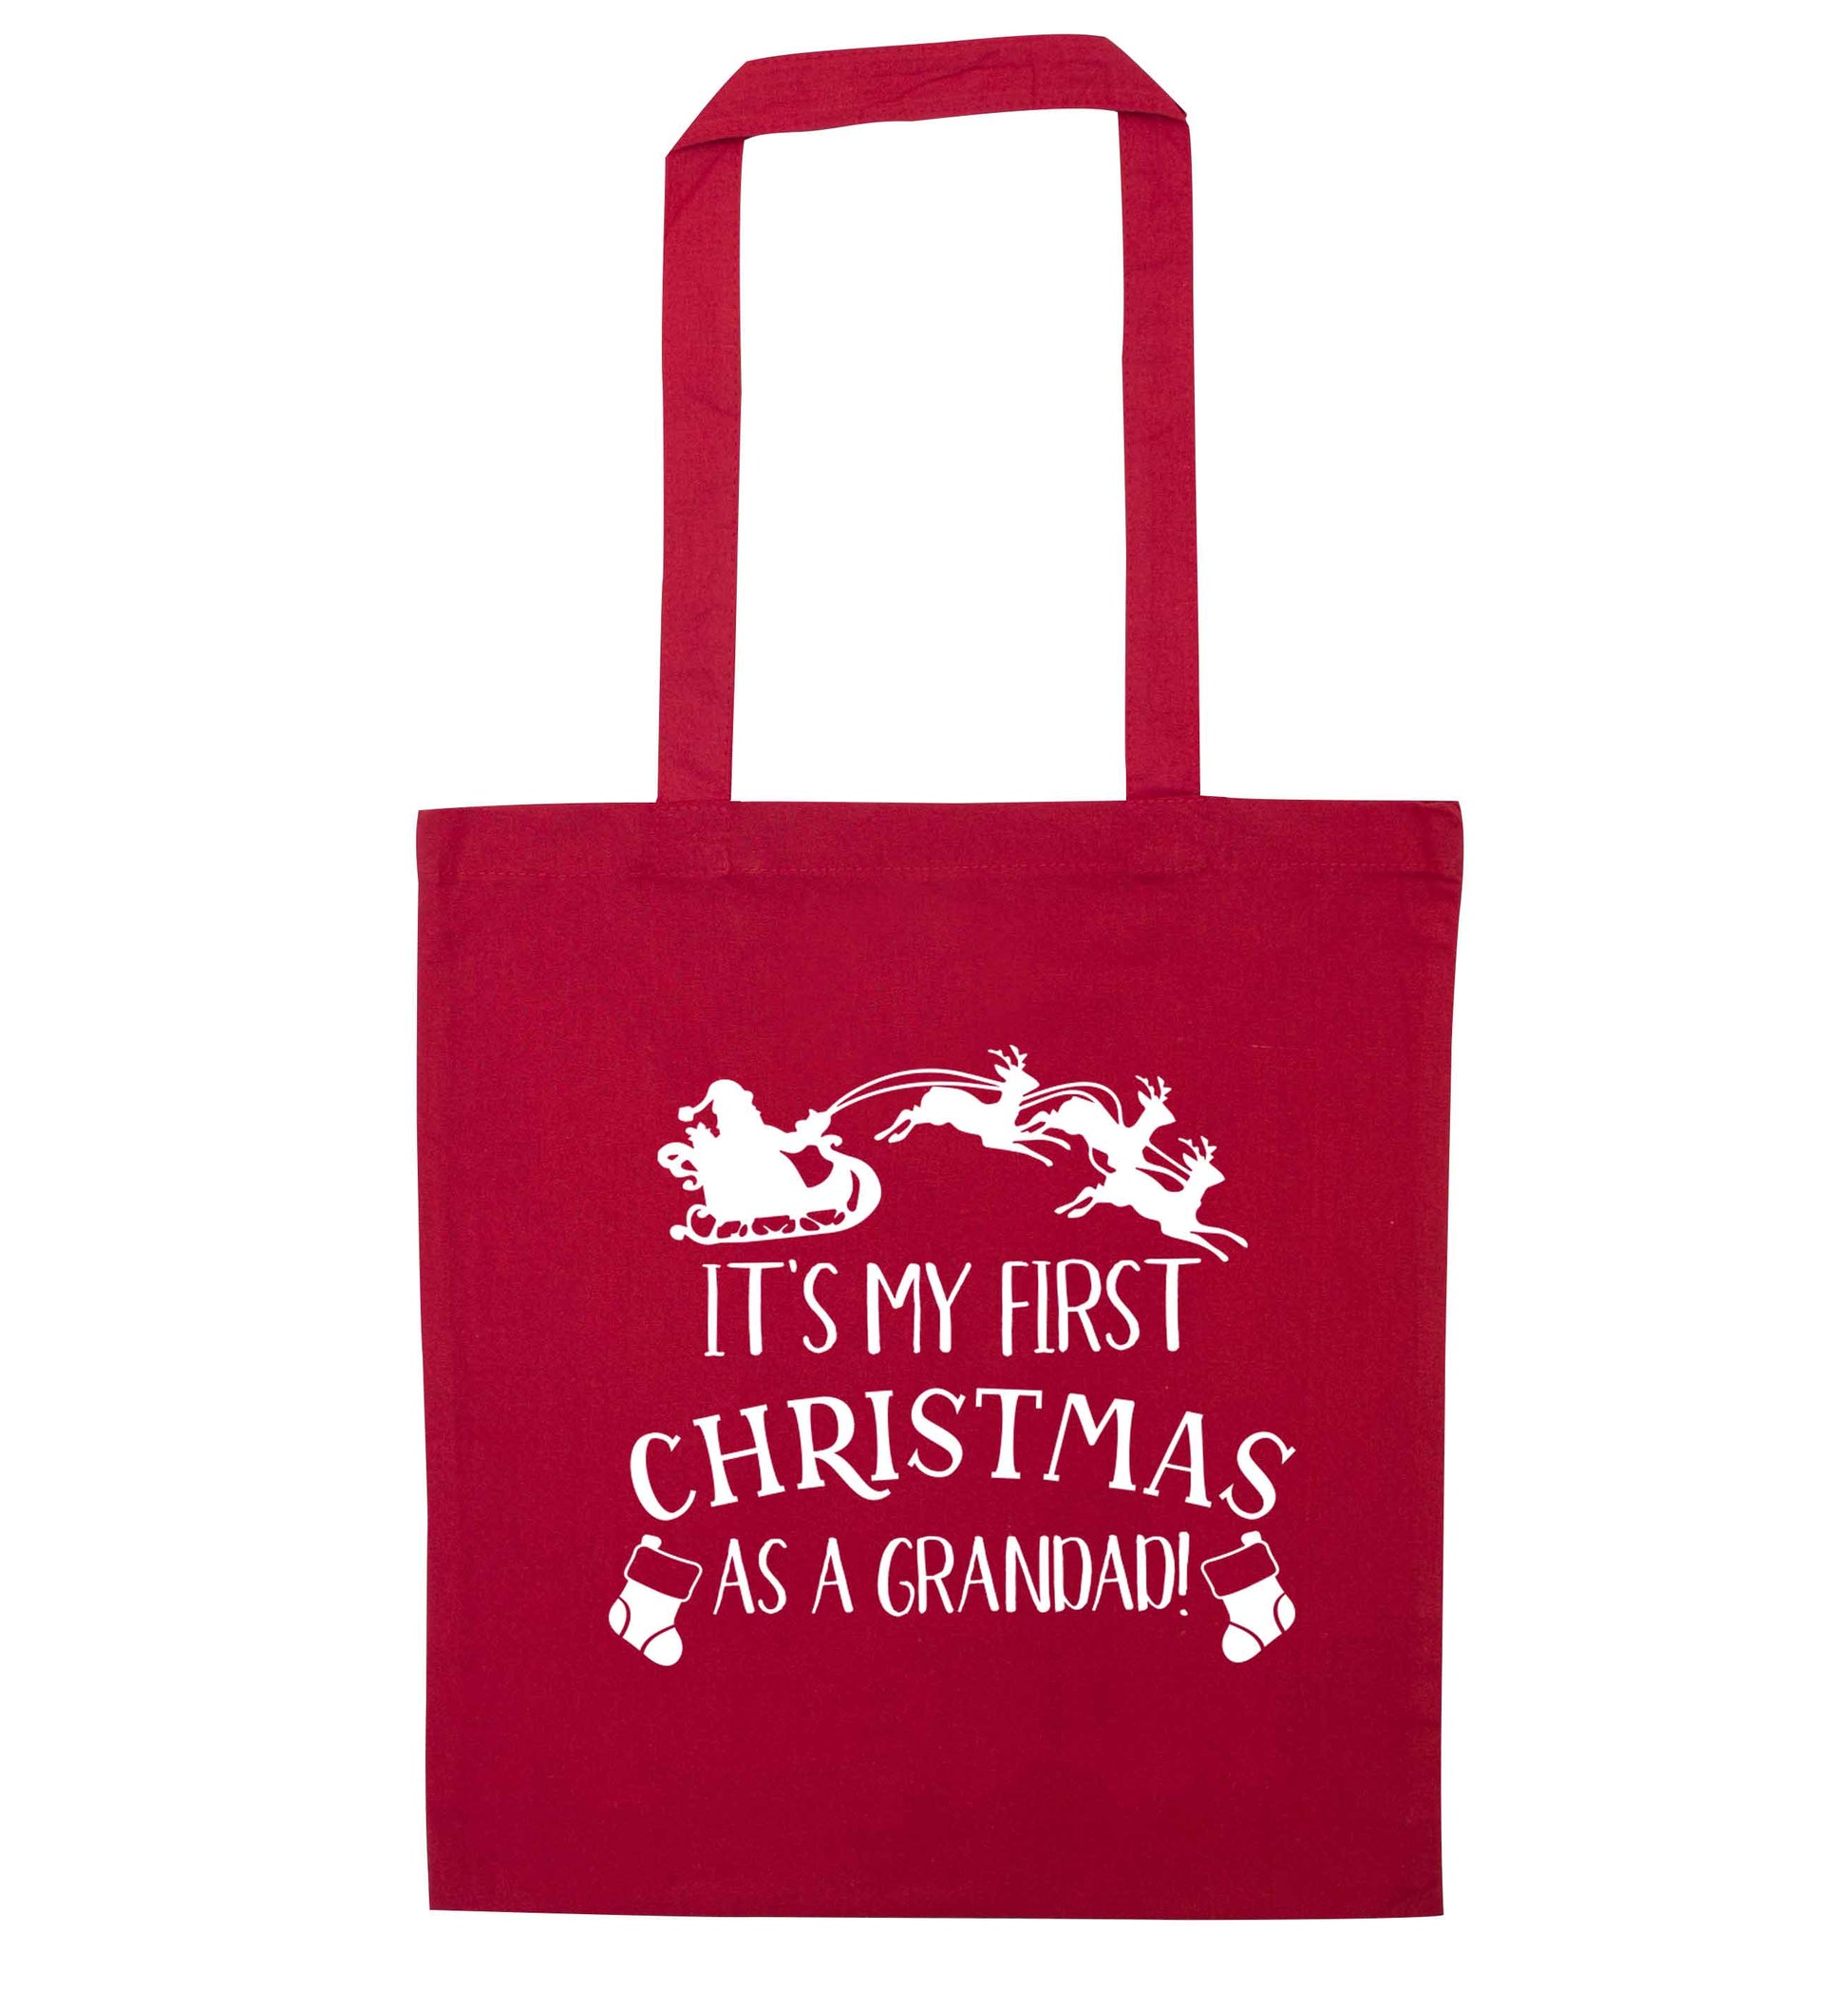 It's my first Christmas as a grandad! red tote bag